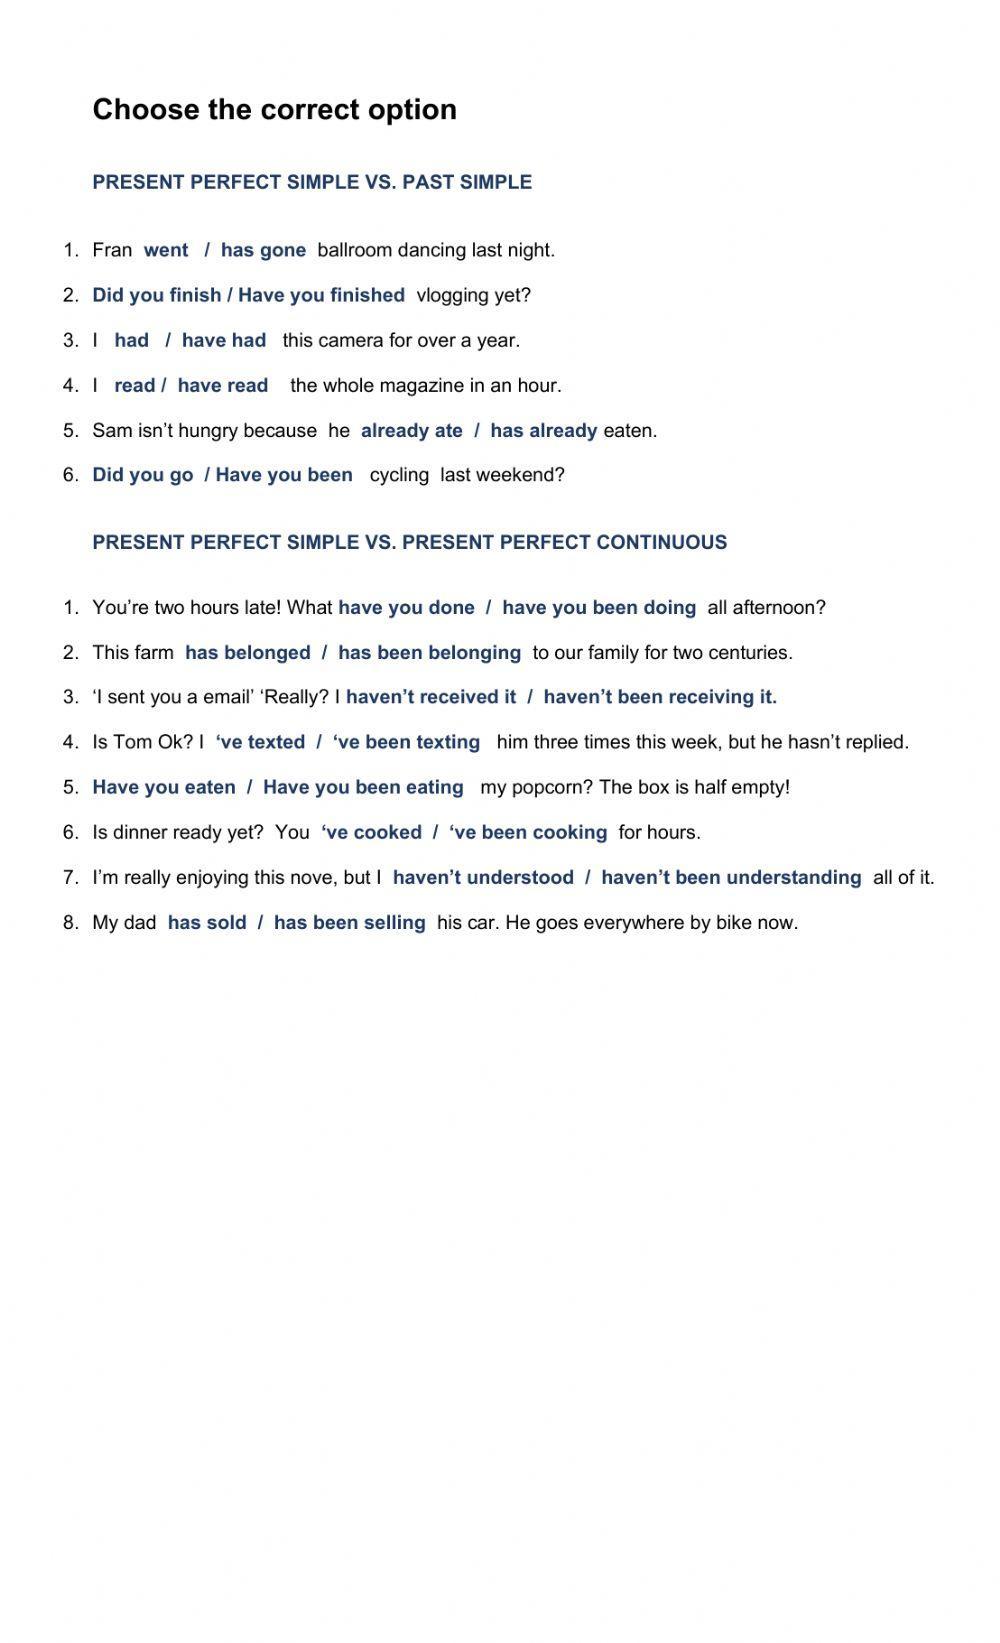 Past simple - Present Perfect simple and Continuous